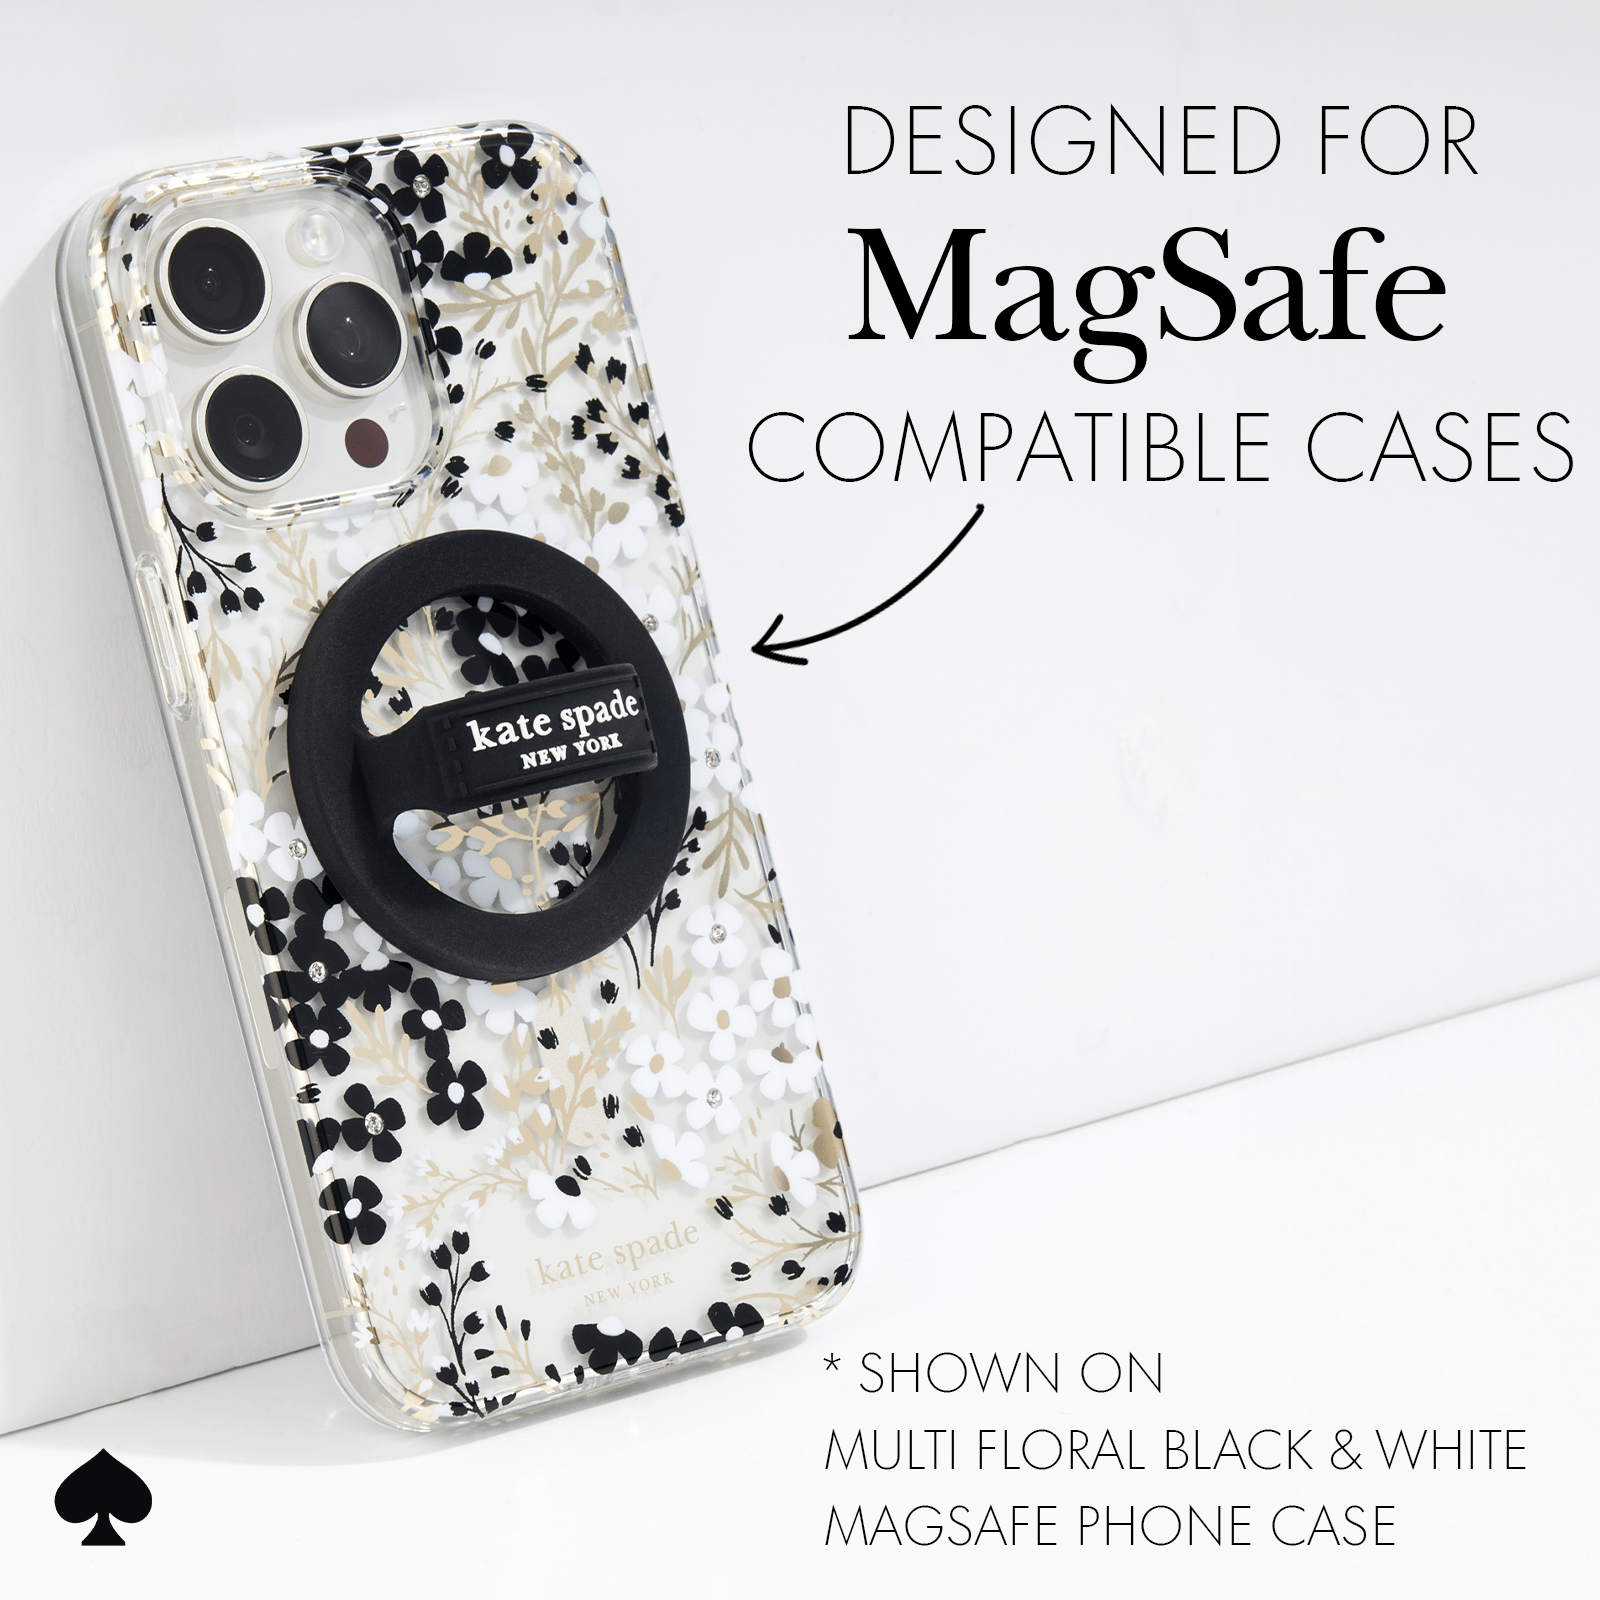 DESIGNED FOR MAGSAFE COMPATIBLE CASES. *SHOWN ON MULTI FLORAL BLACK AND WHITE MAGSAFE PHONE CASE